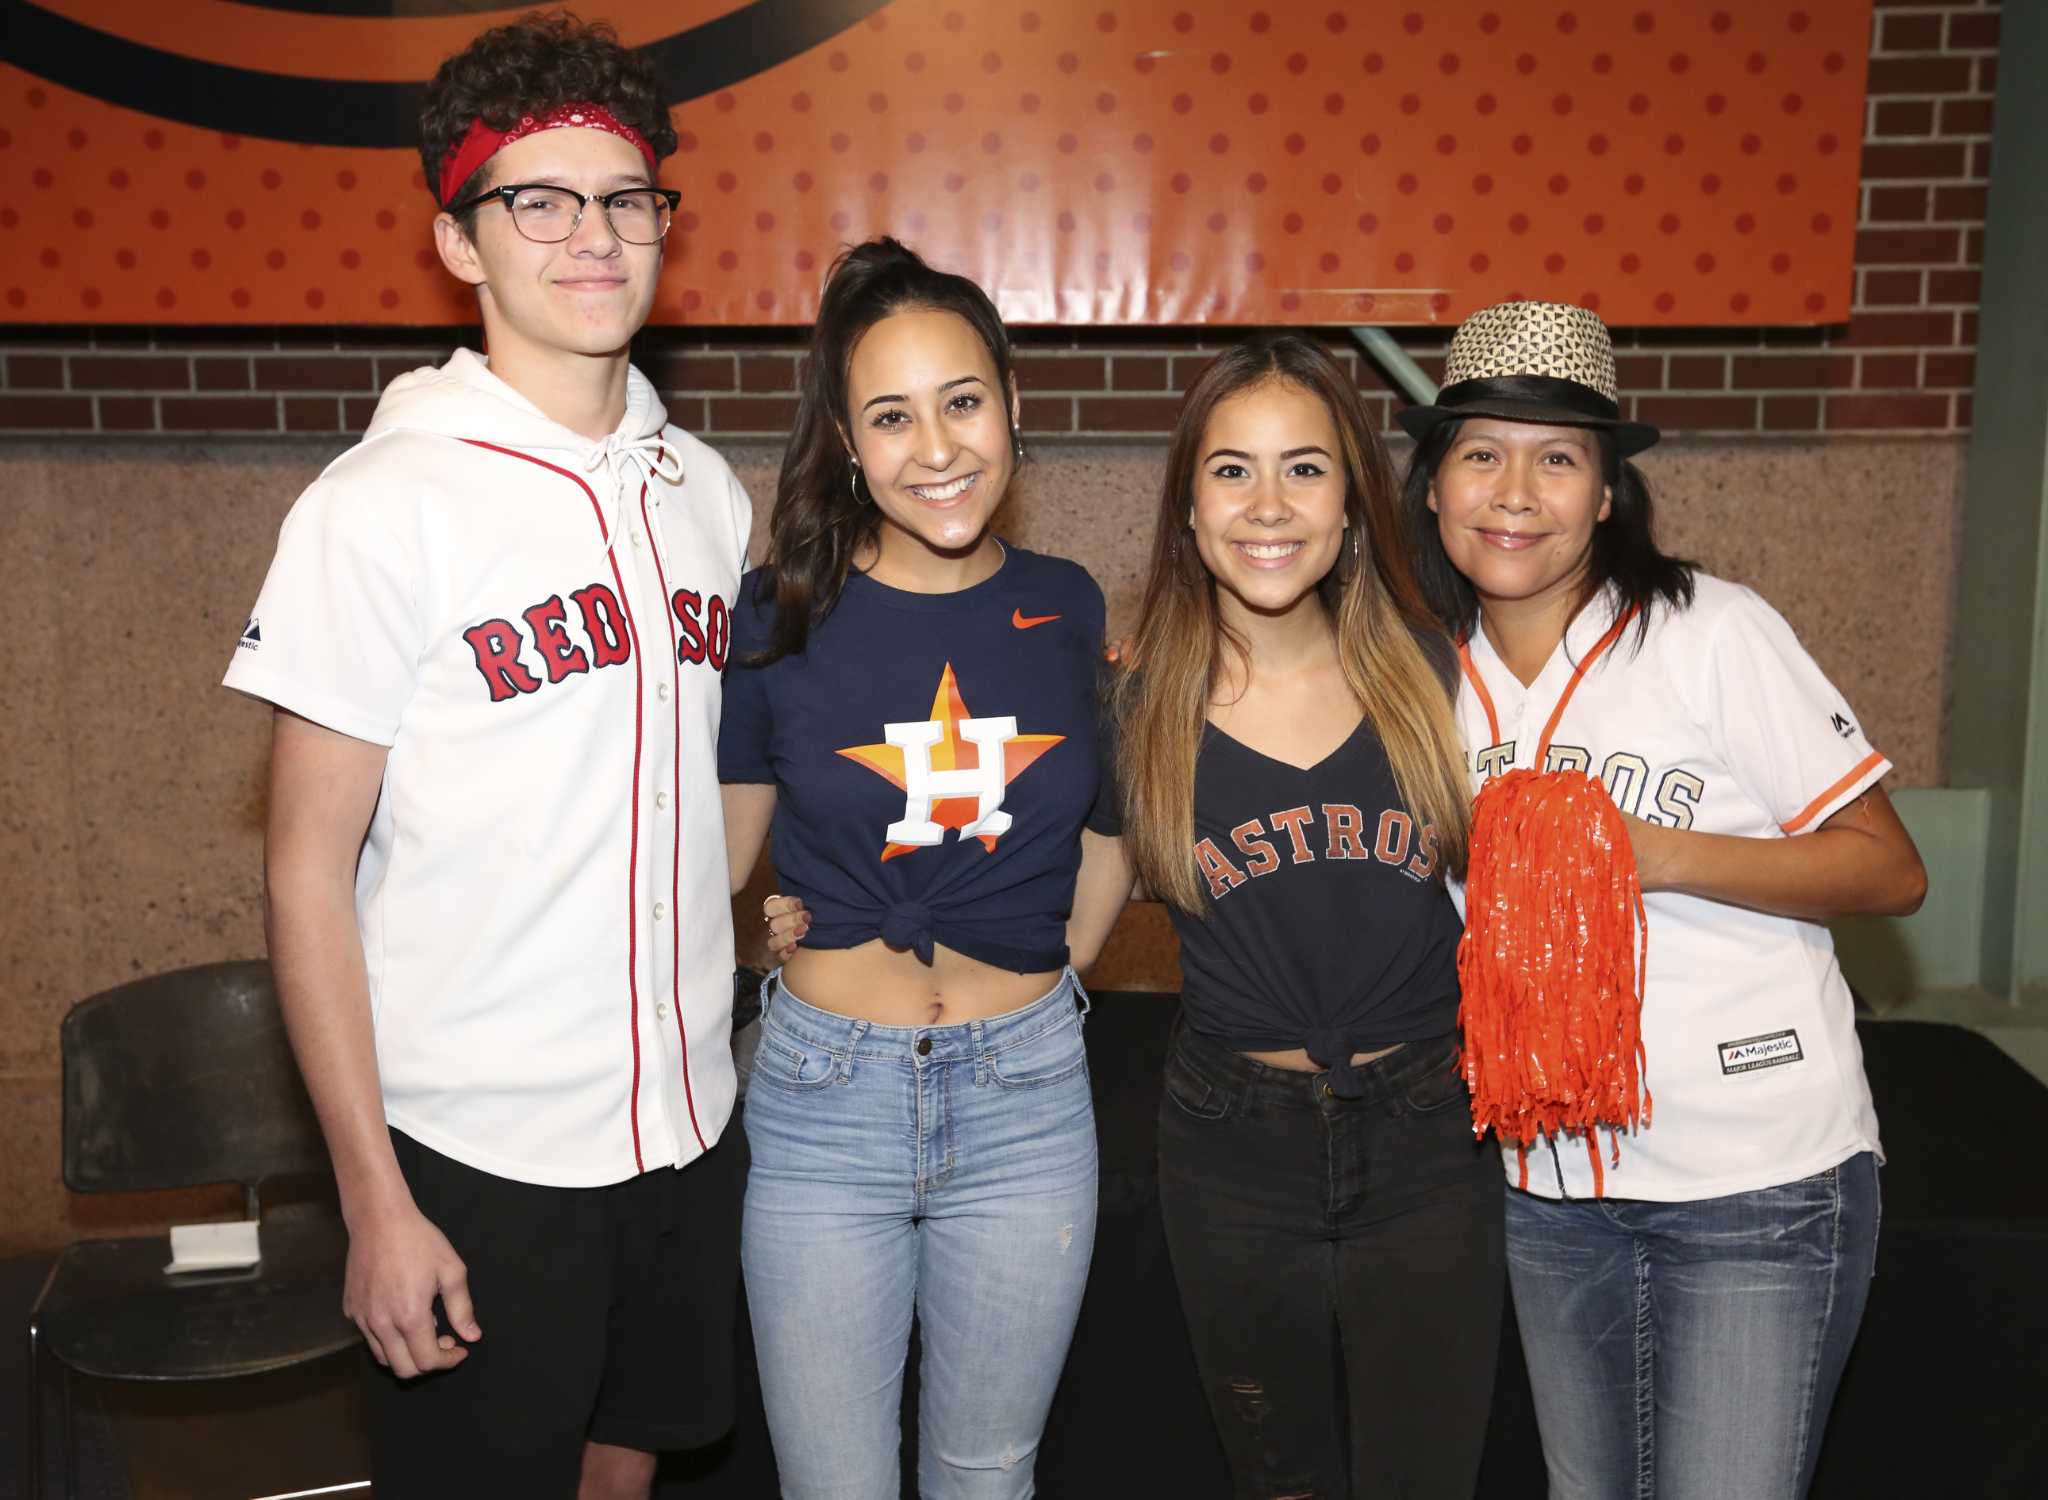 Check out fans at Game 4 of Astros-Red Sox series